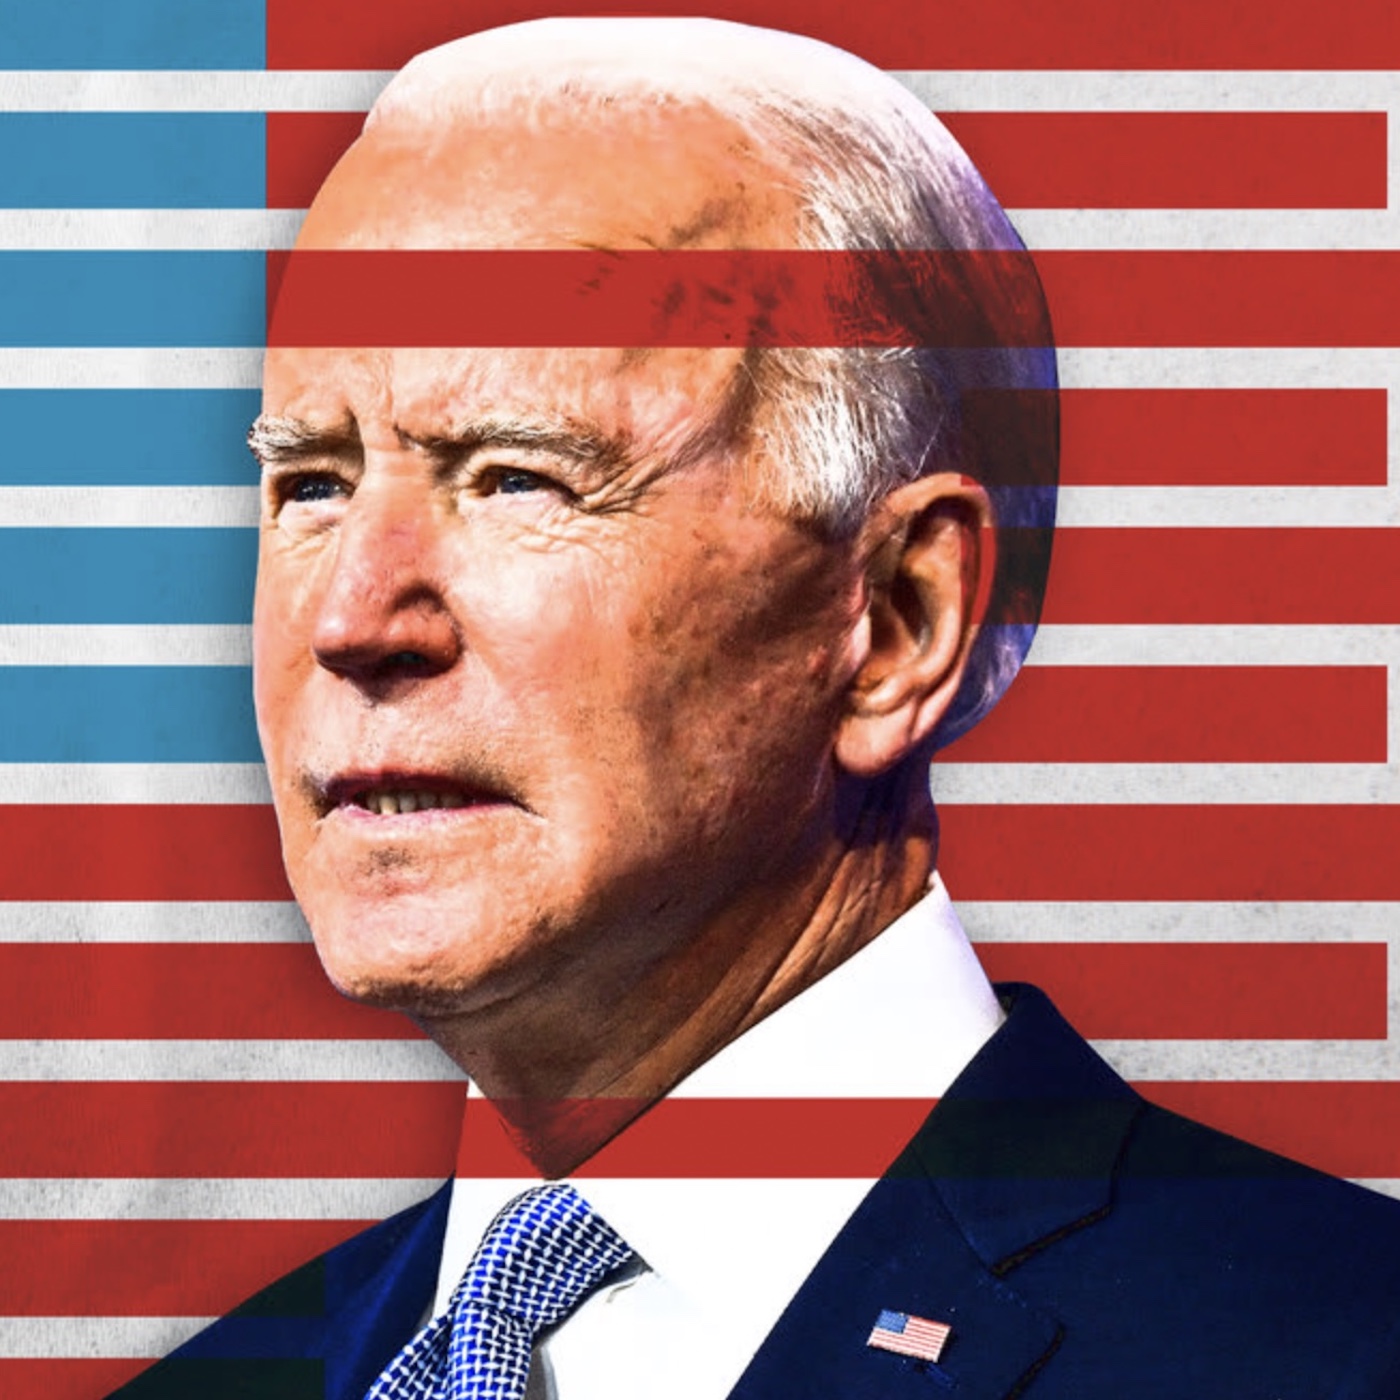 Biden's Bad Poll Numbers: Harold Meyerson, plus Marc Cooper on Chile and Heather Cox Richardson on Democracy